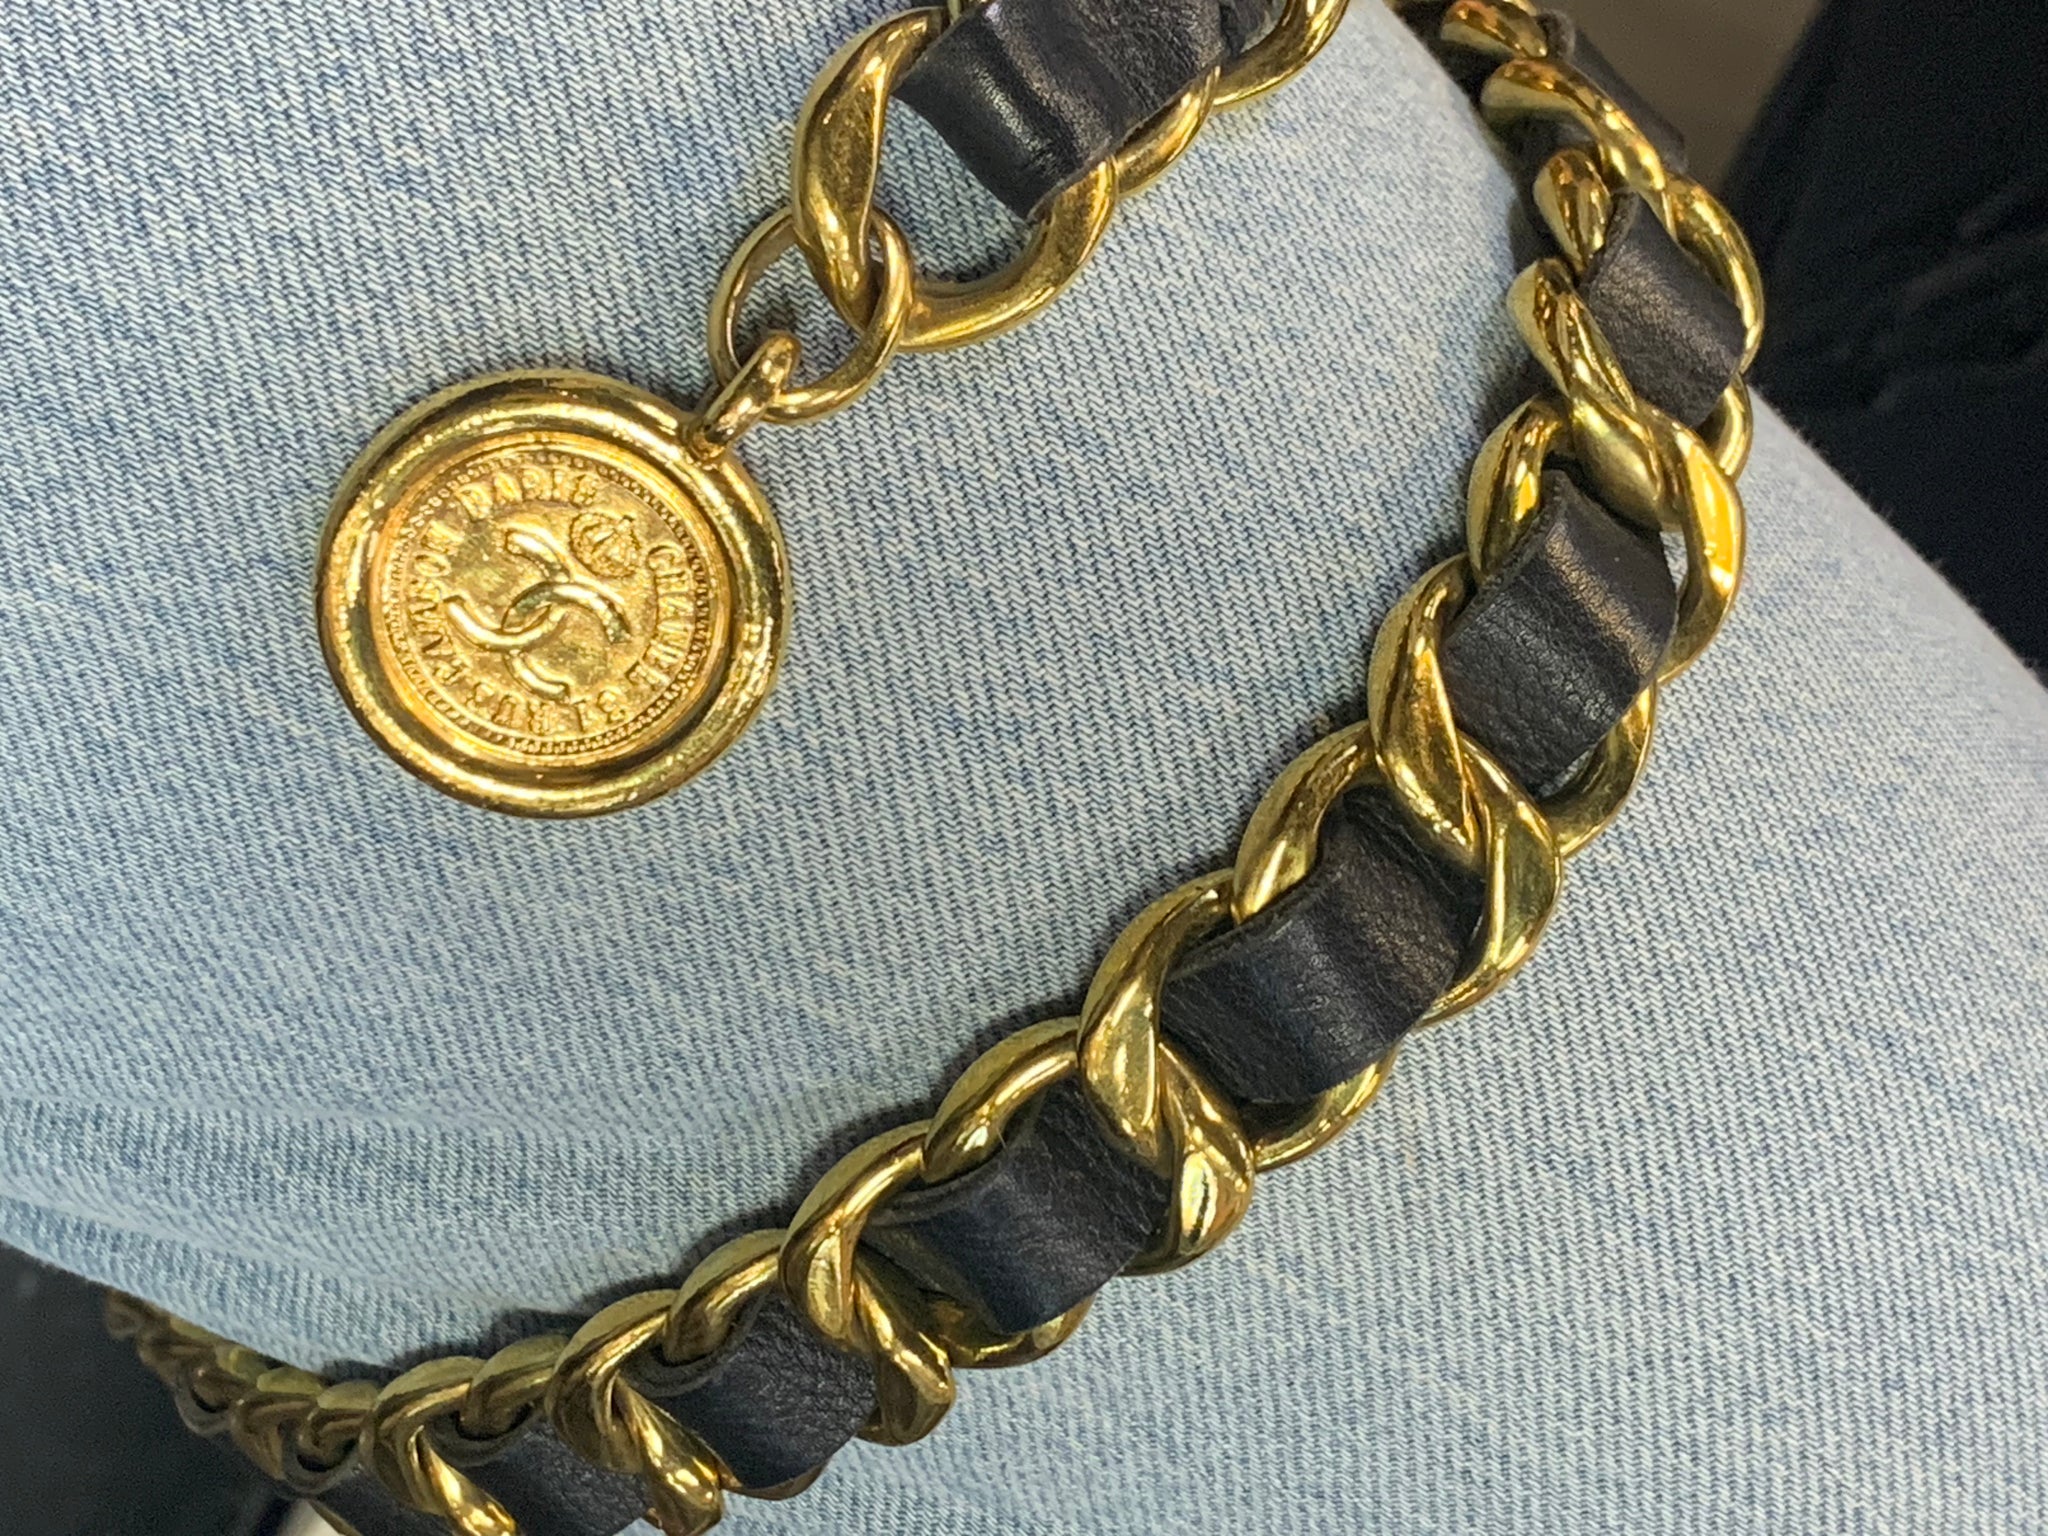 1994 Chanel Coin Chain Leather Belt